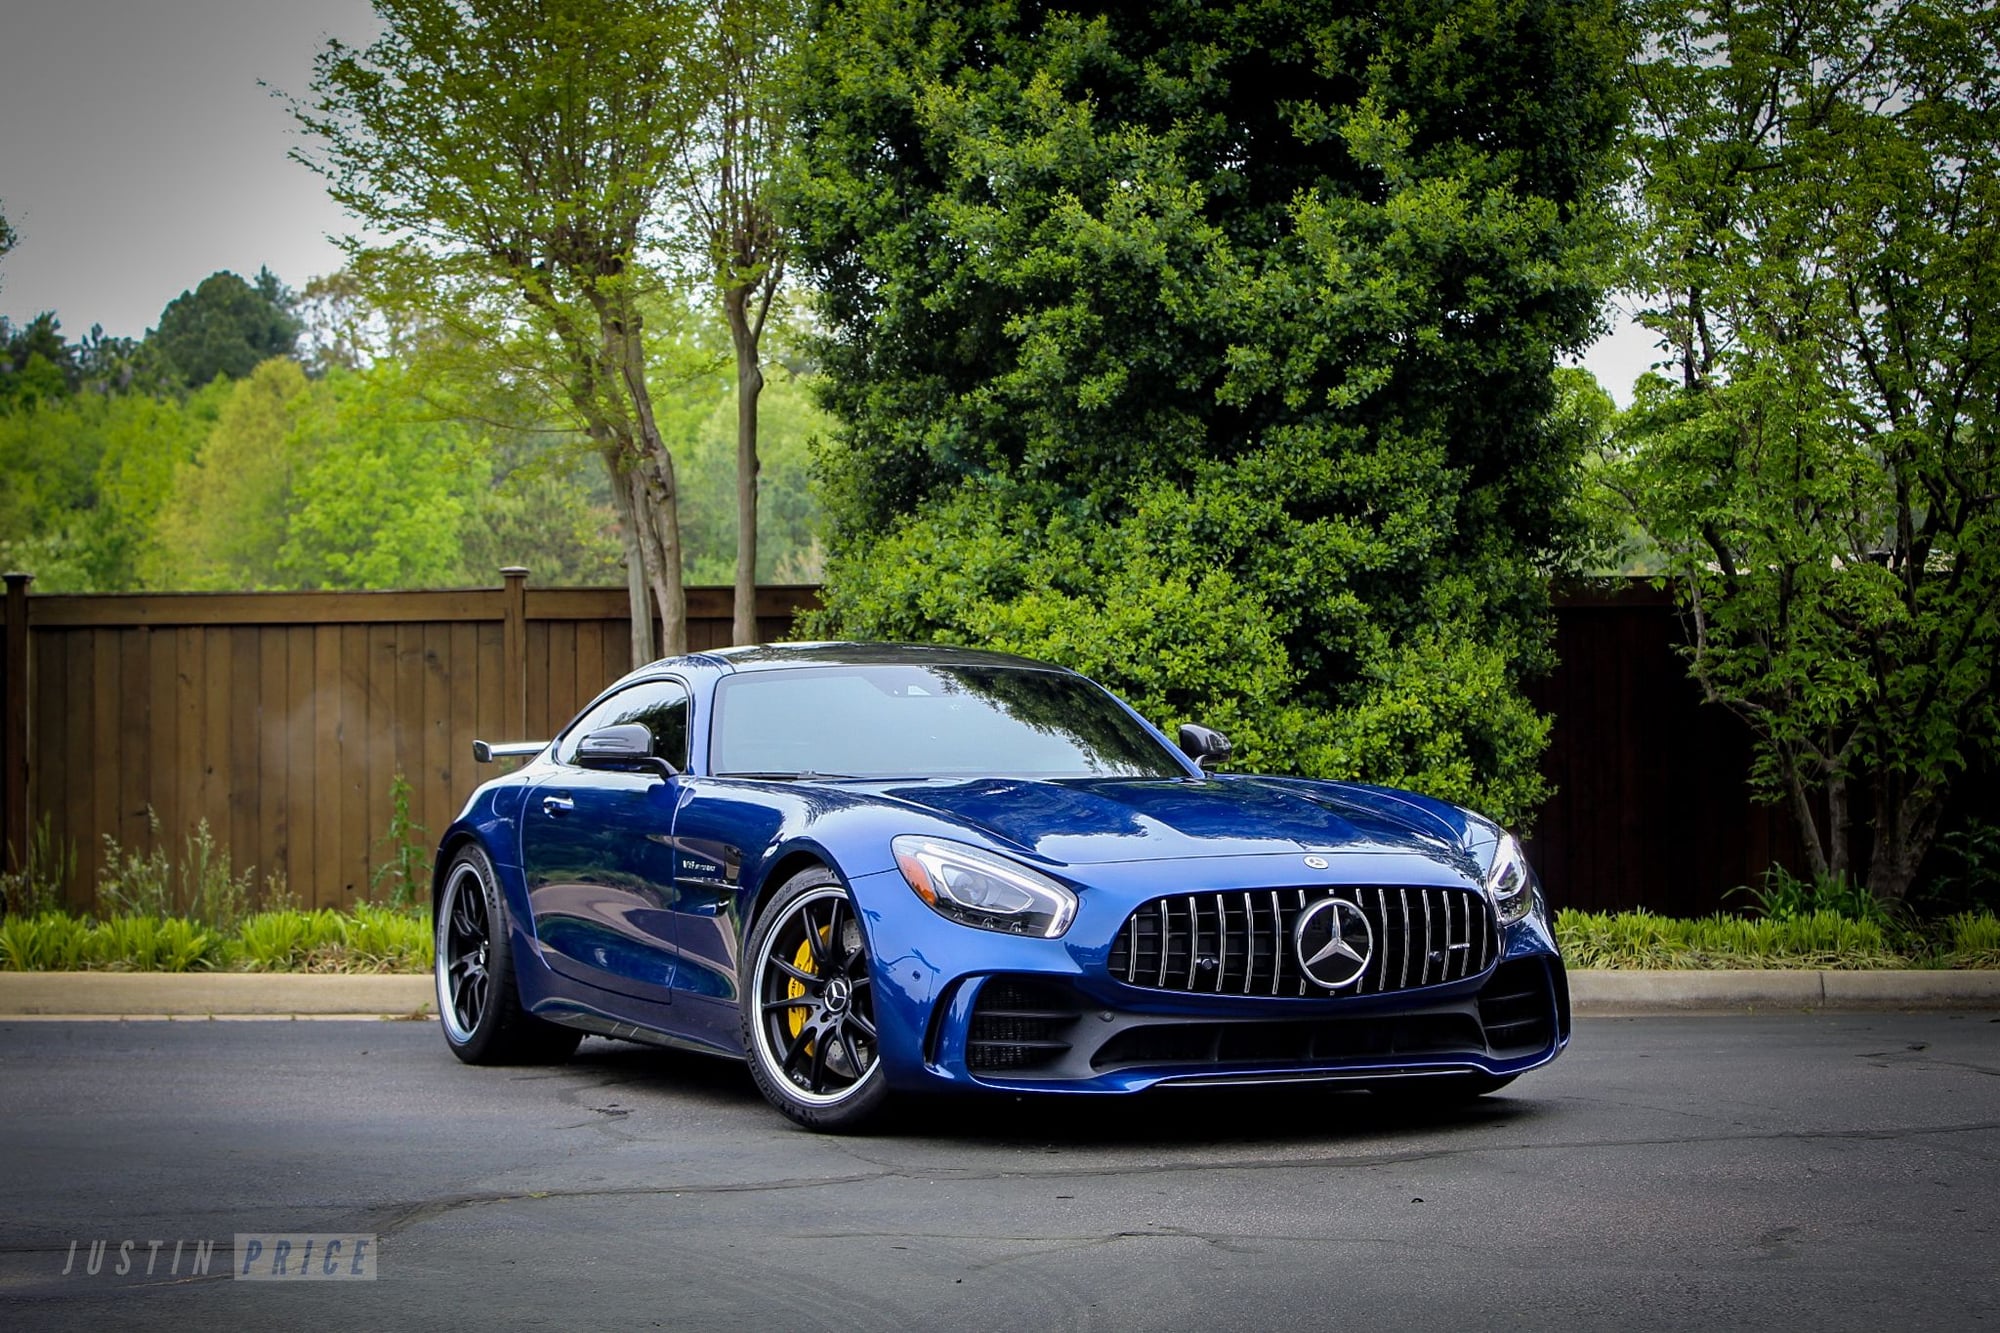 2018 Mercedes-Benz AMG GT R - 2018 Mercedes AMG GTR - Used - VIN WDDYJ7KAXJA021678 - 8,558 Miles - 8 cyl - 2WD - Automatic - Coupe - Blue - Richmond, VA 23113, United States